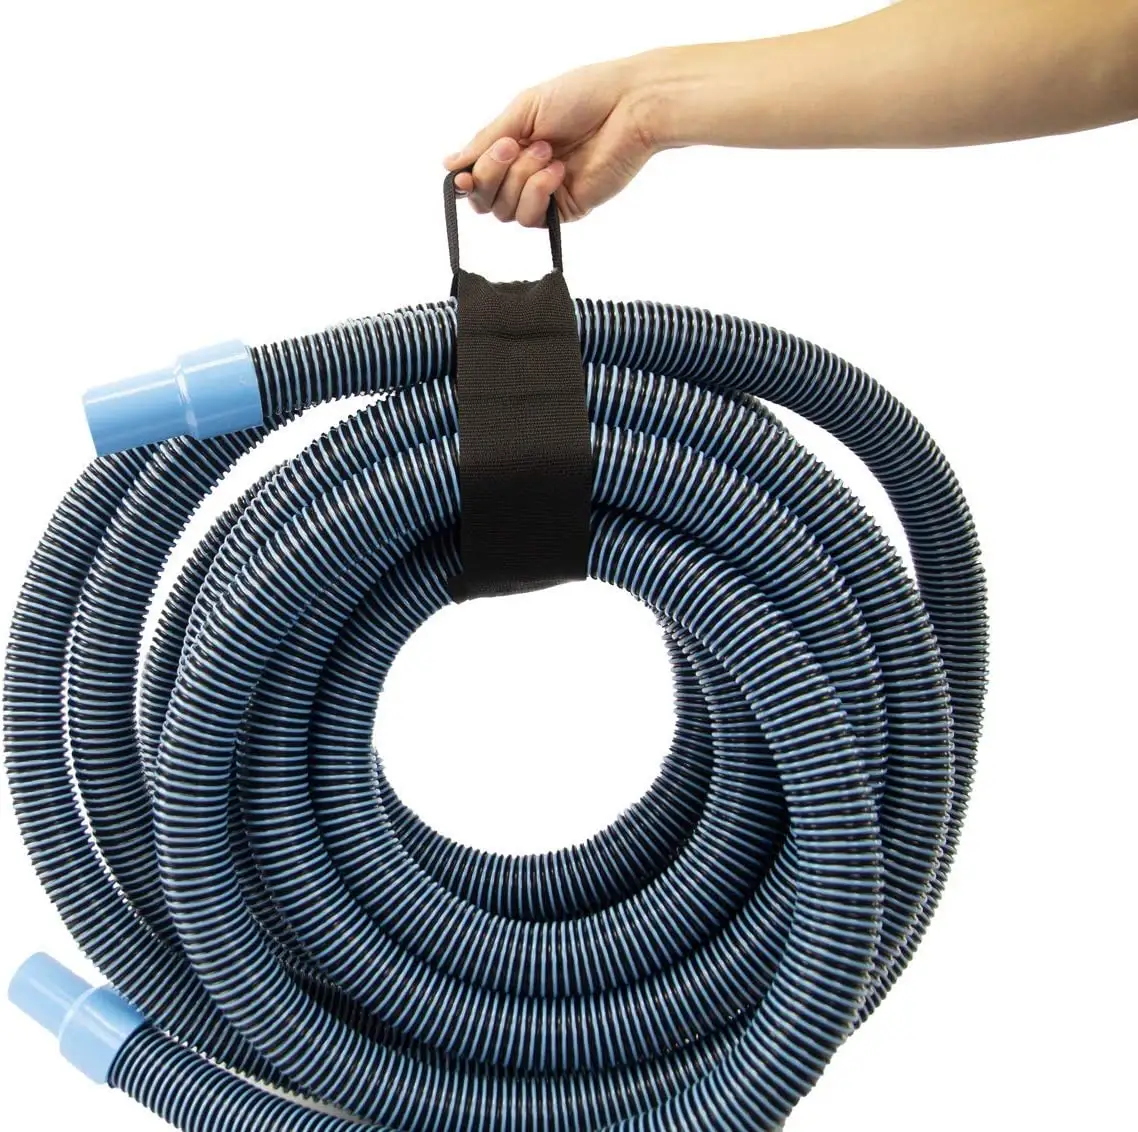 Flexible PVC Pipe, Swimming Pool and Spa Hose Tubing, Schedule 40, Pump Filtration